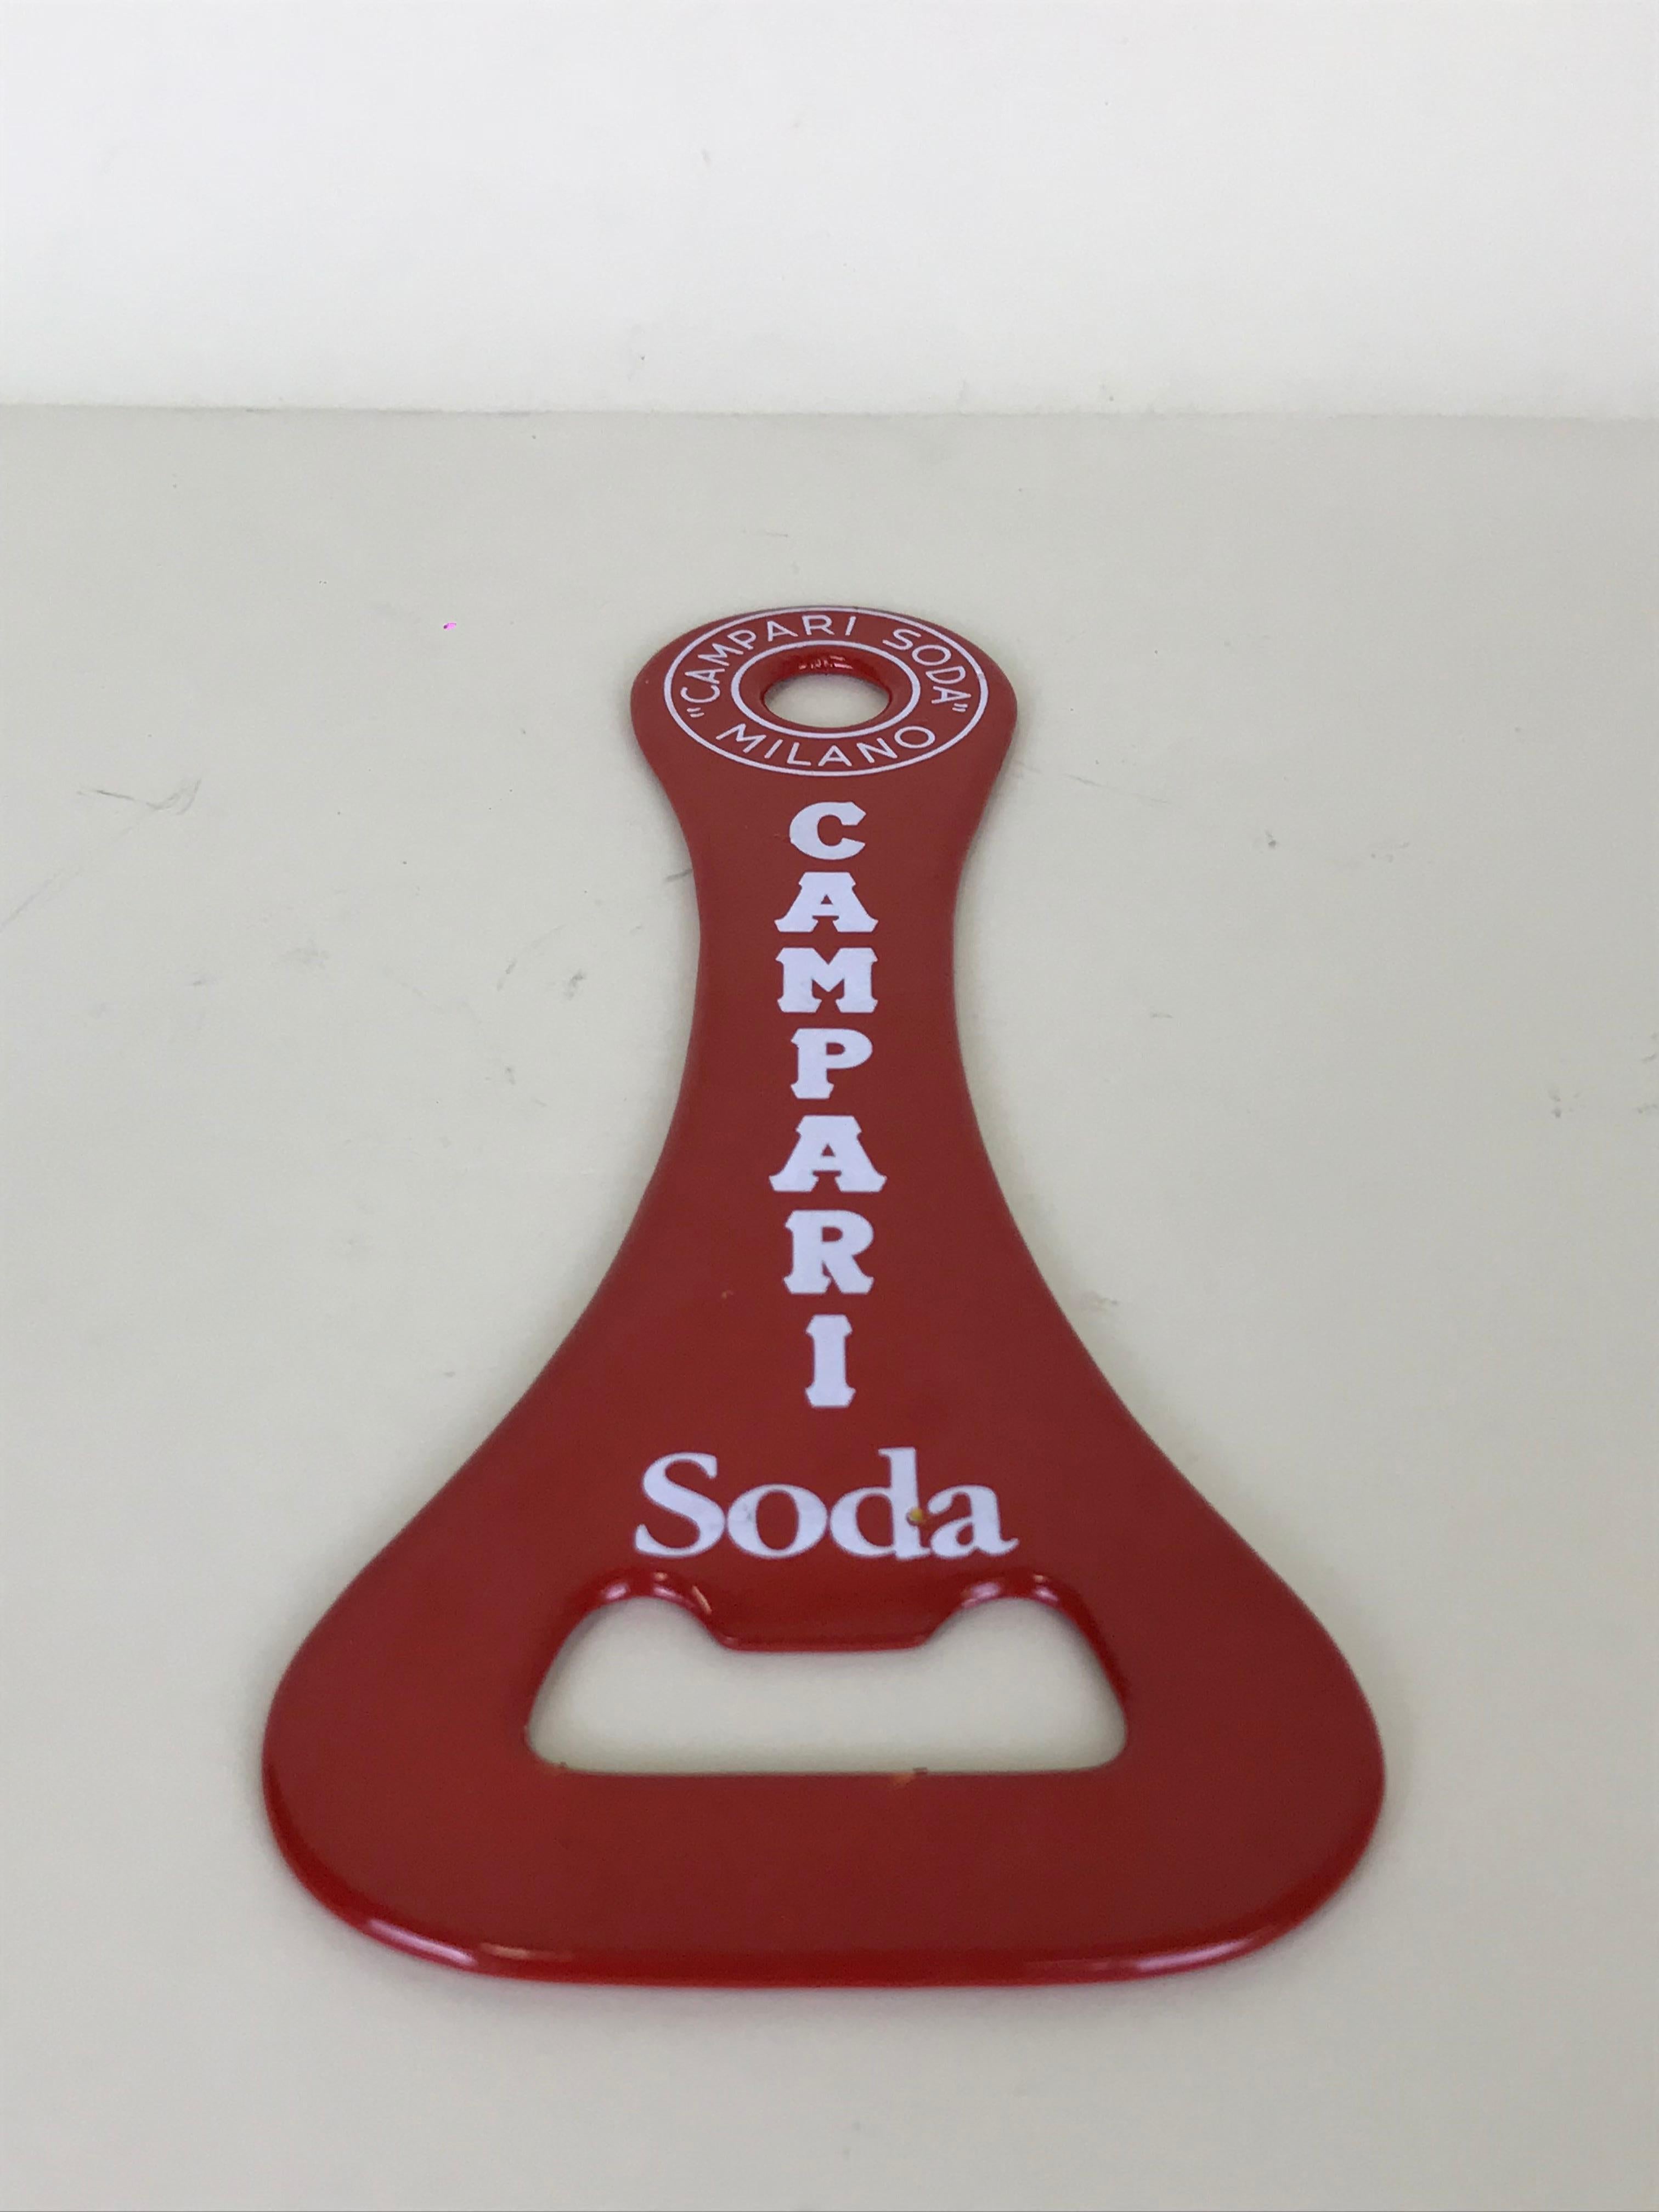 Iconic vintage Italian Campari Soda ultra slim metal red bottle opener.
 
Collector's note:

Campari is an Italian alcoholic liqueur, considered an apéritif obtained from the infusion of herbs and fruit in alcohol and water. Campari is an